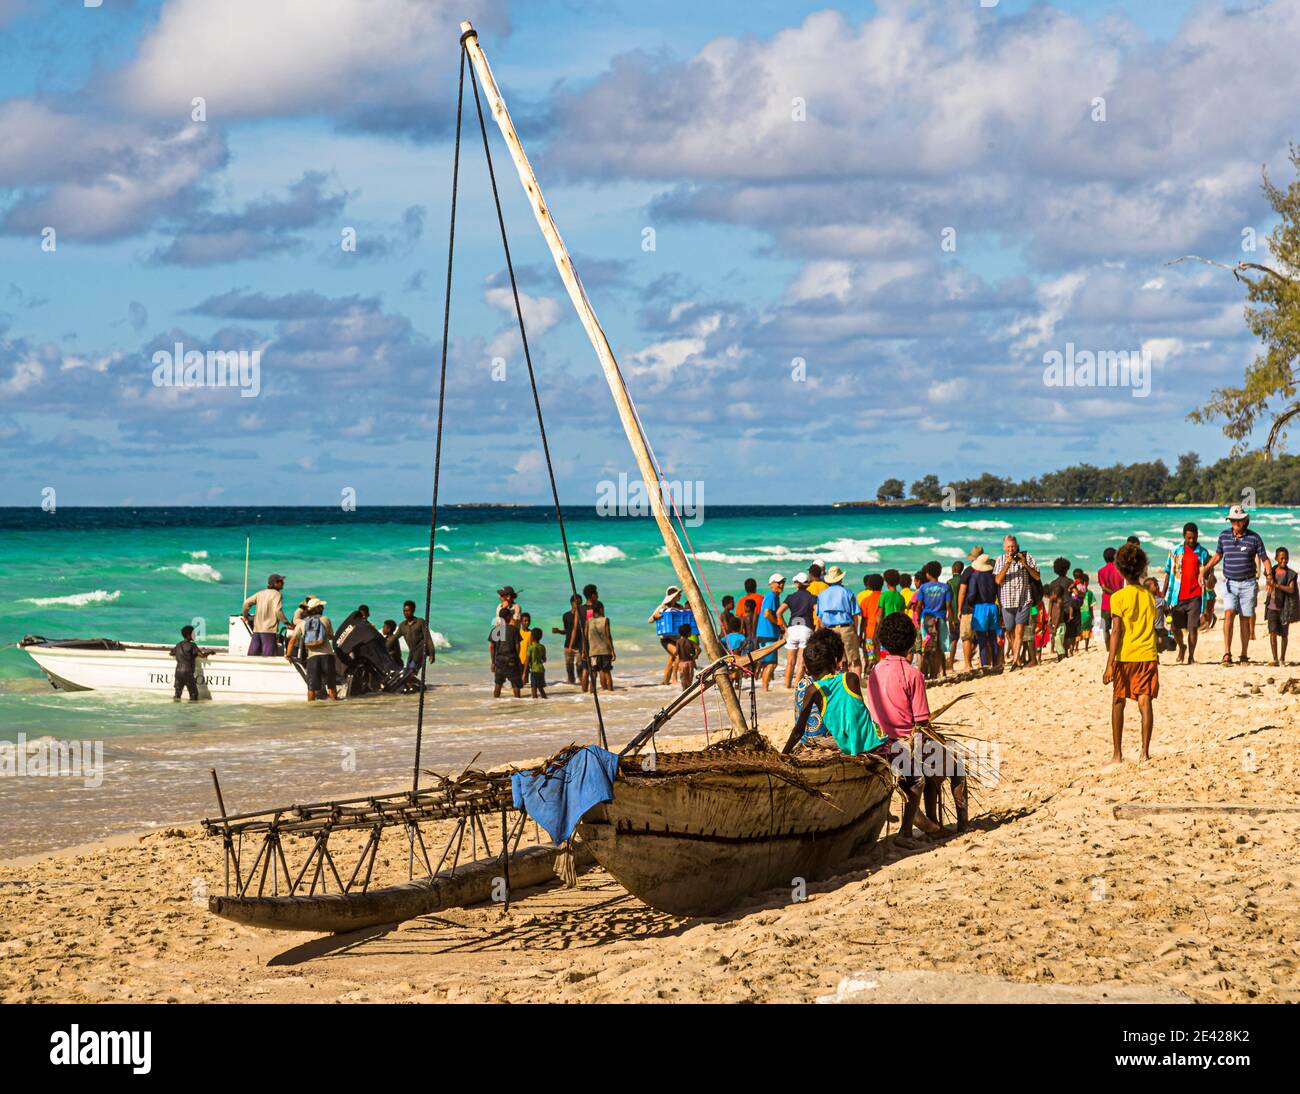 Local people and tourists are meeting on a beach in Papua New Guinea Stock Photo